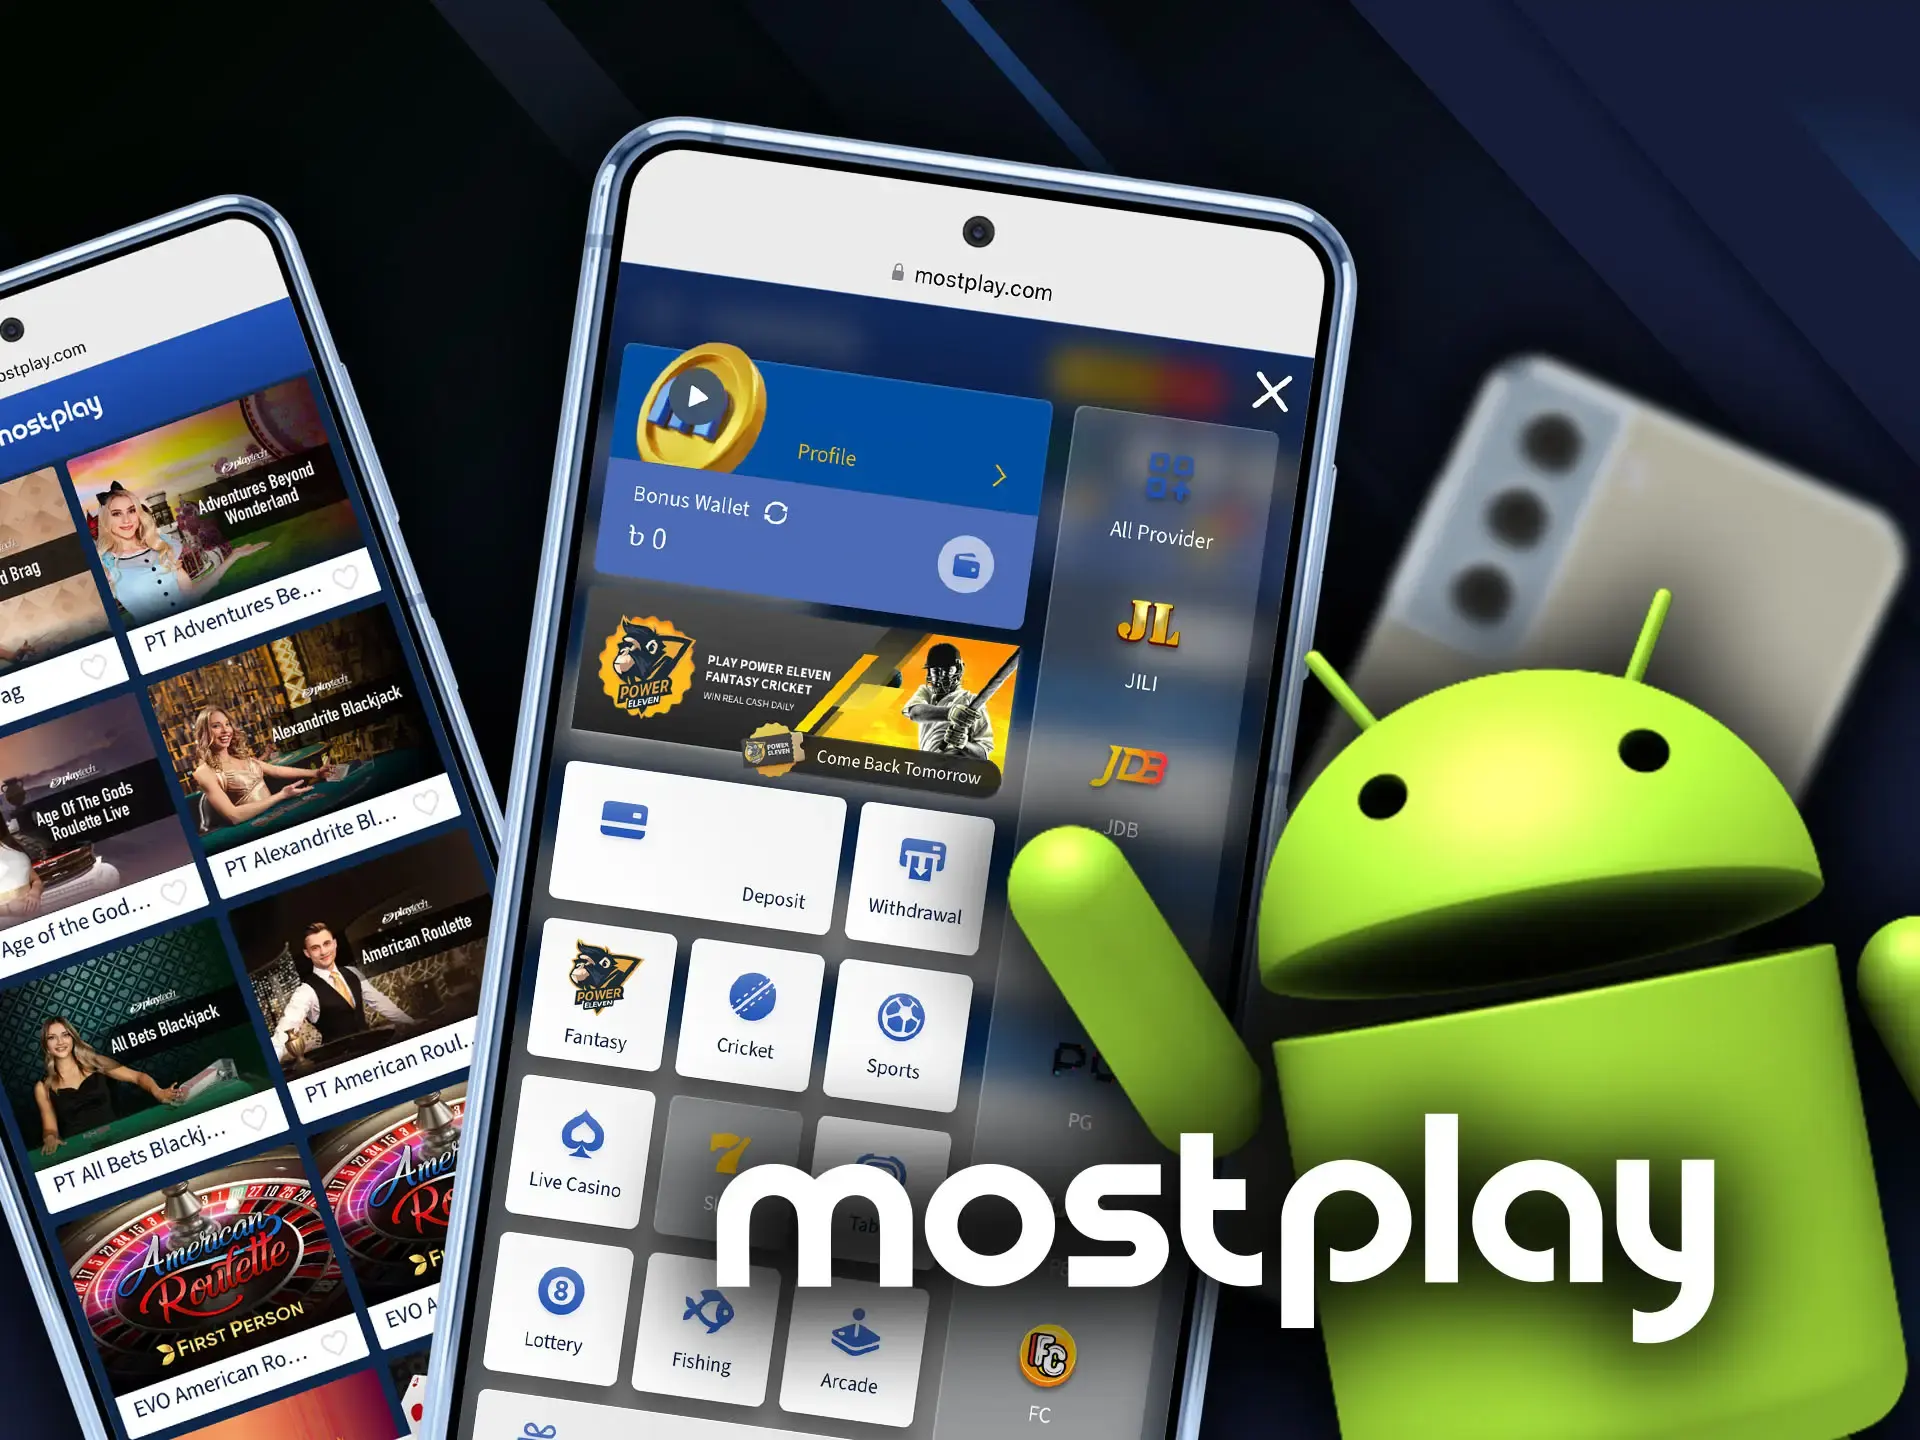 Download and install Mostplay Android app on your device.